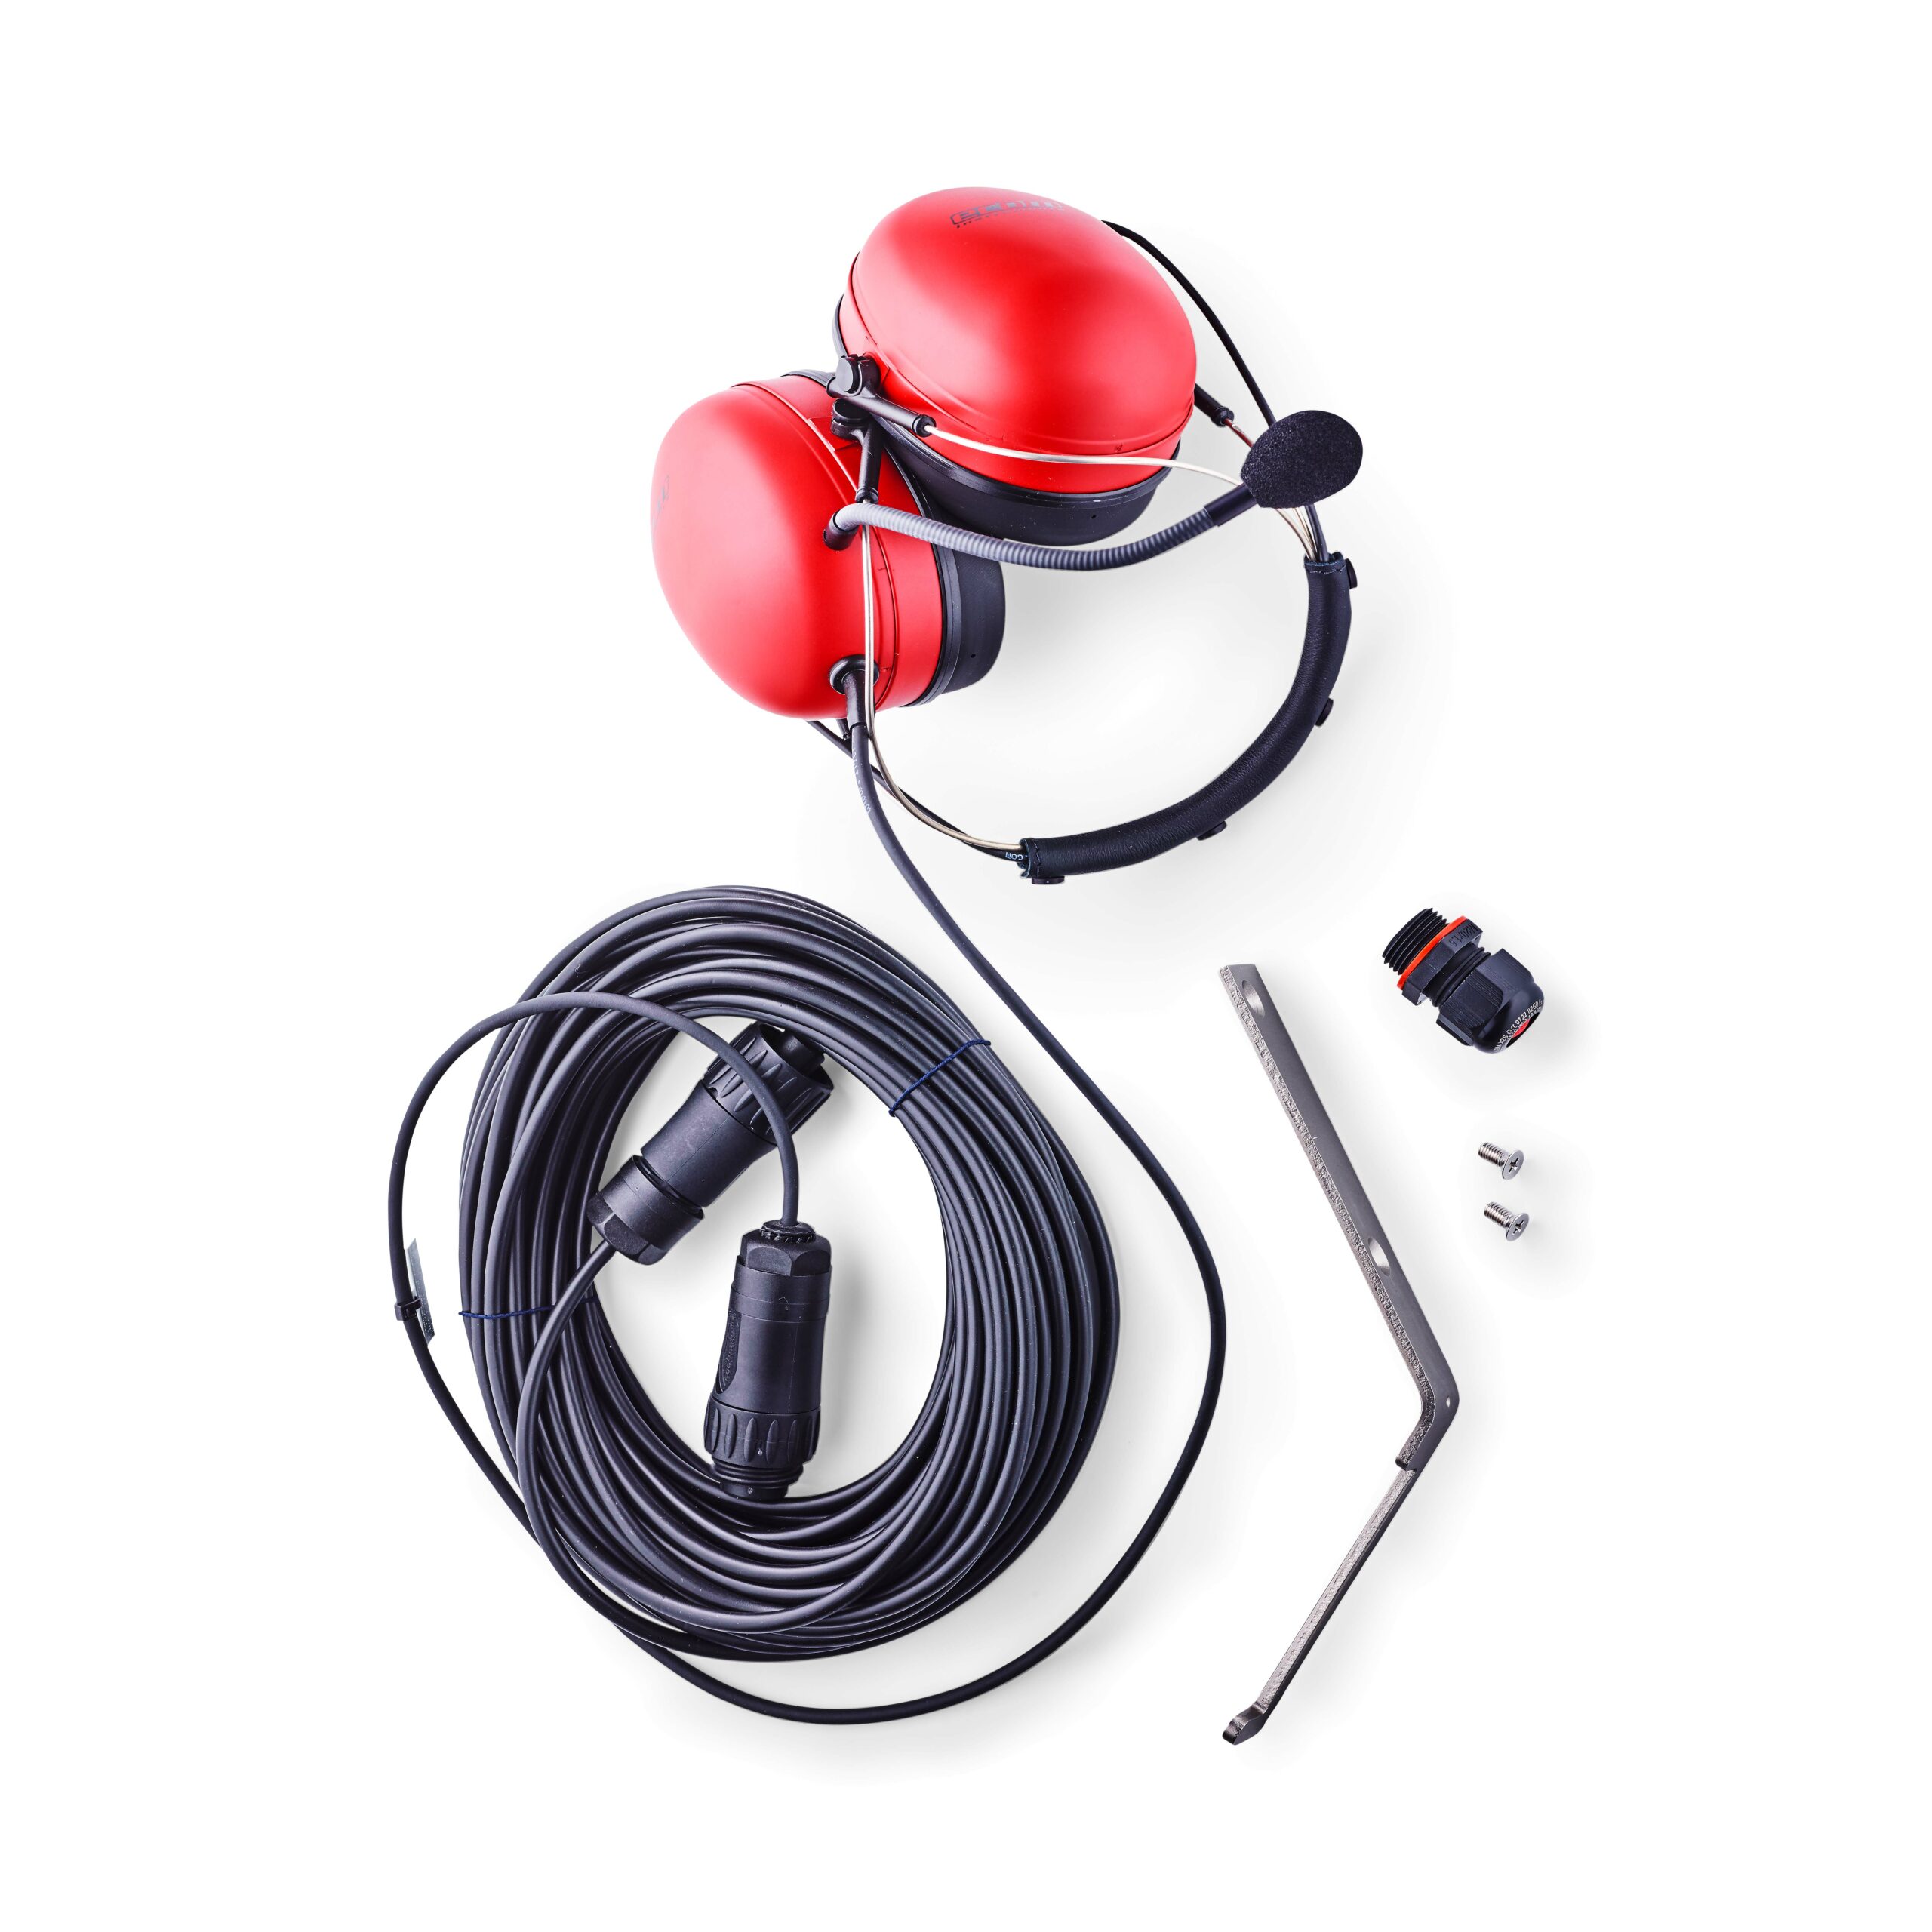 Headset Kit HS1 for Ex-Proof Telephone